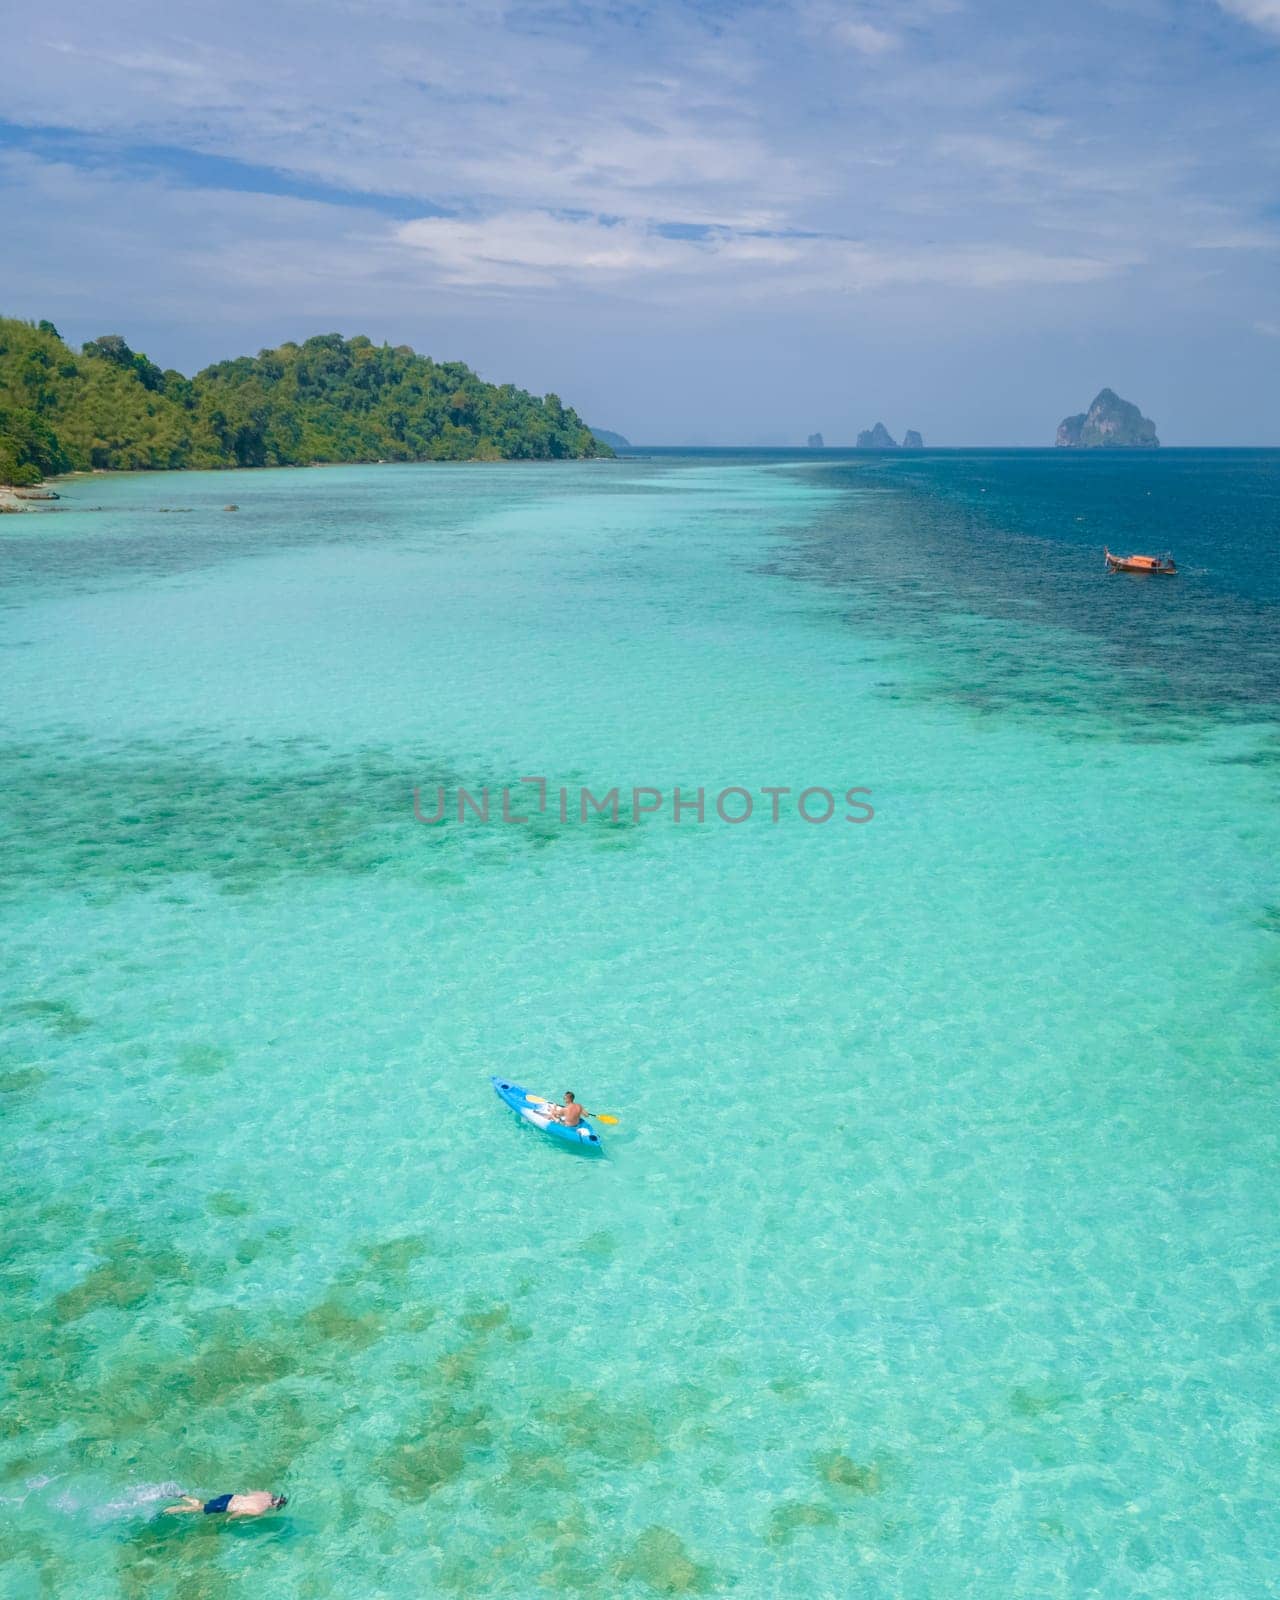 Young men in a kayak at the bleu turqouse colored ocean of Koh Kradan Thailand, a tropical island with a coral reef in the ocean, Koh Kradan Trang Thailand